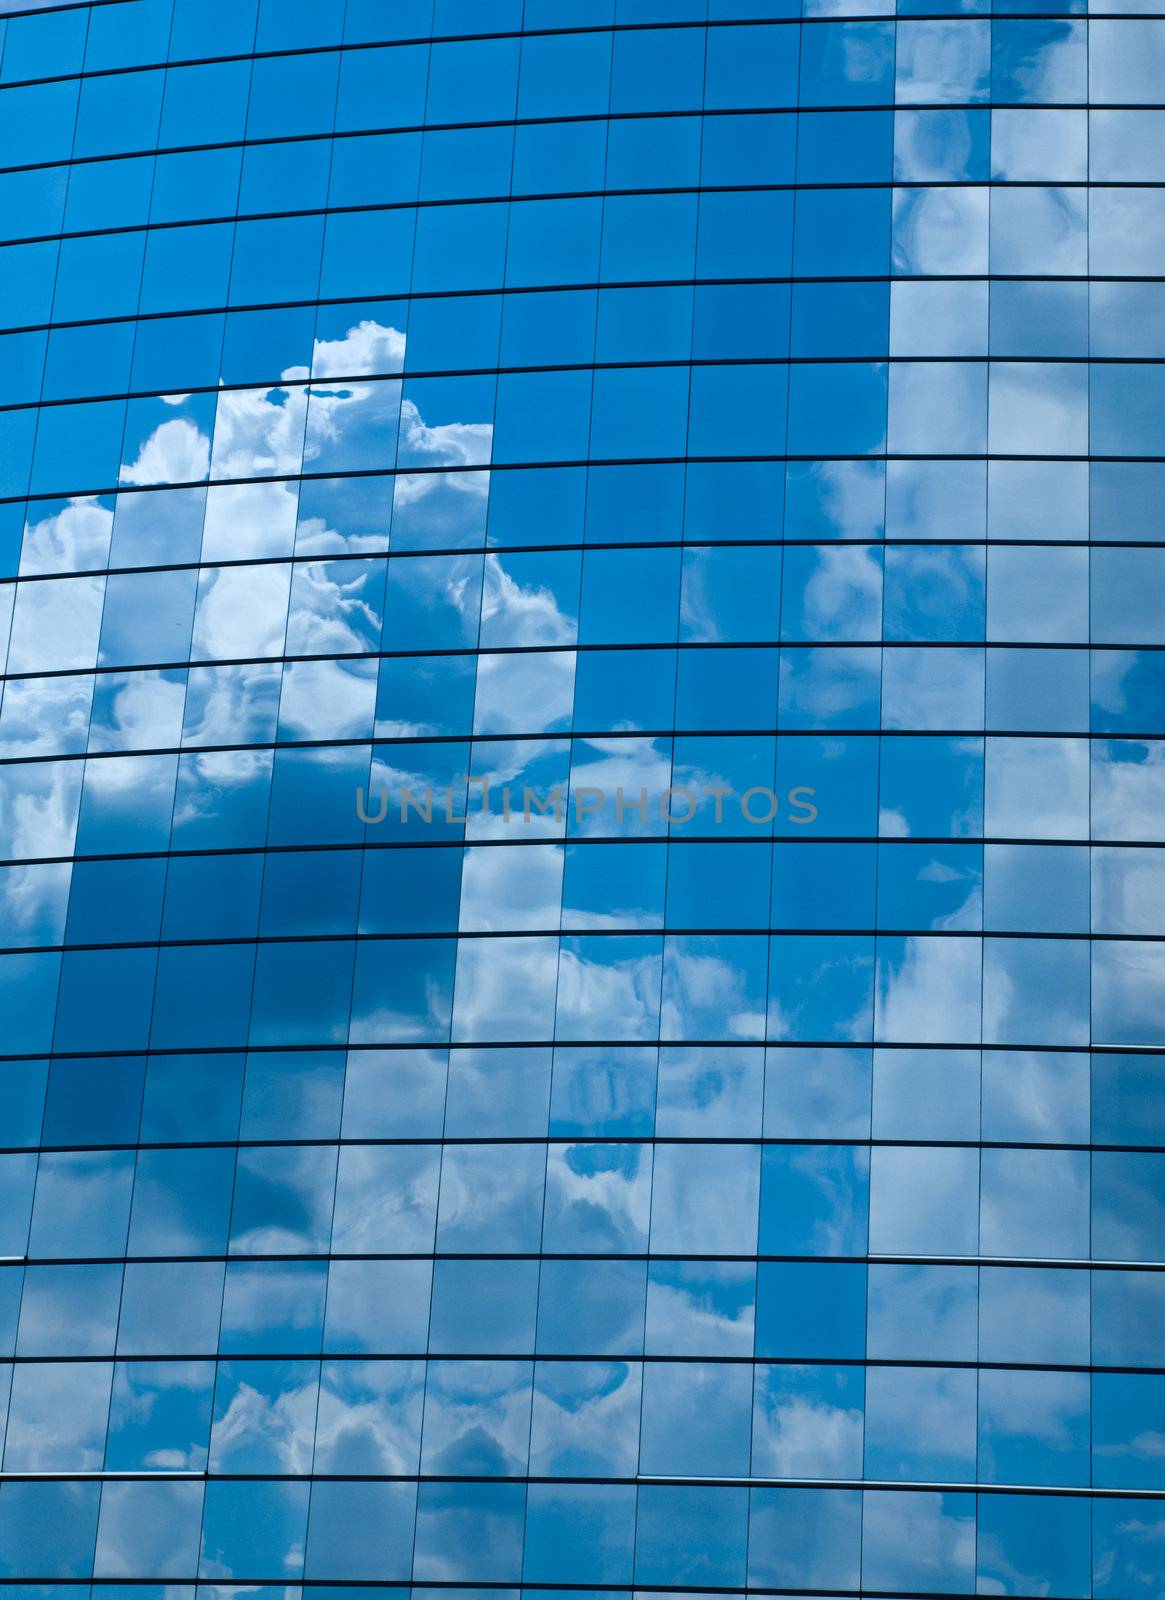 Clouds reflected in windows of modern office building by Frankljunior